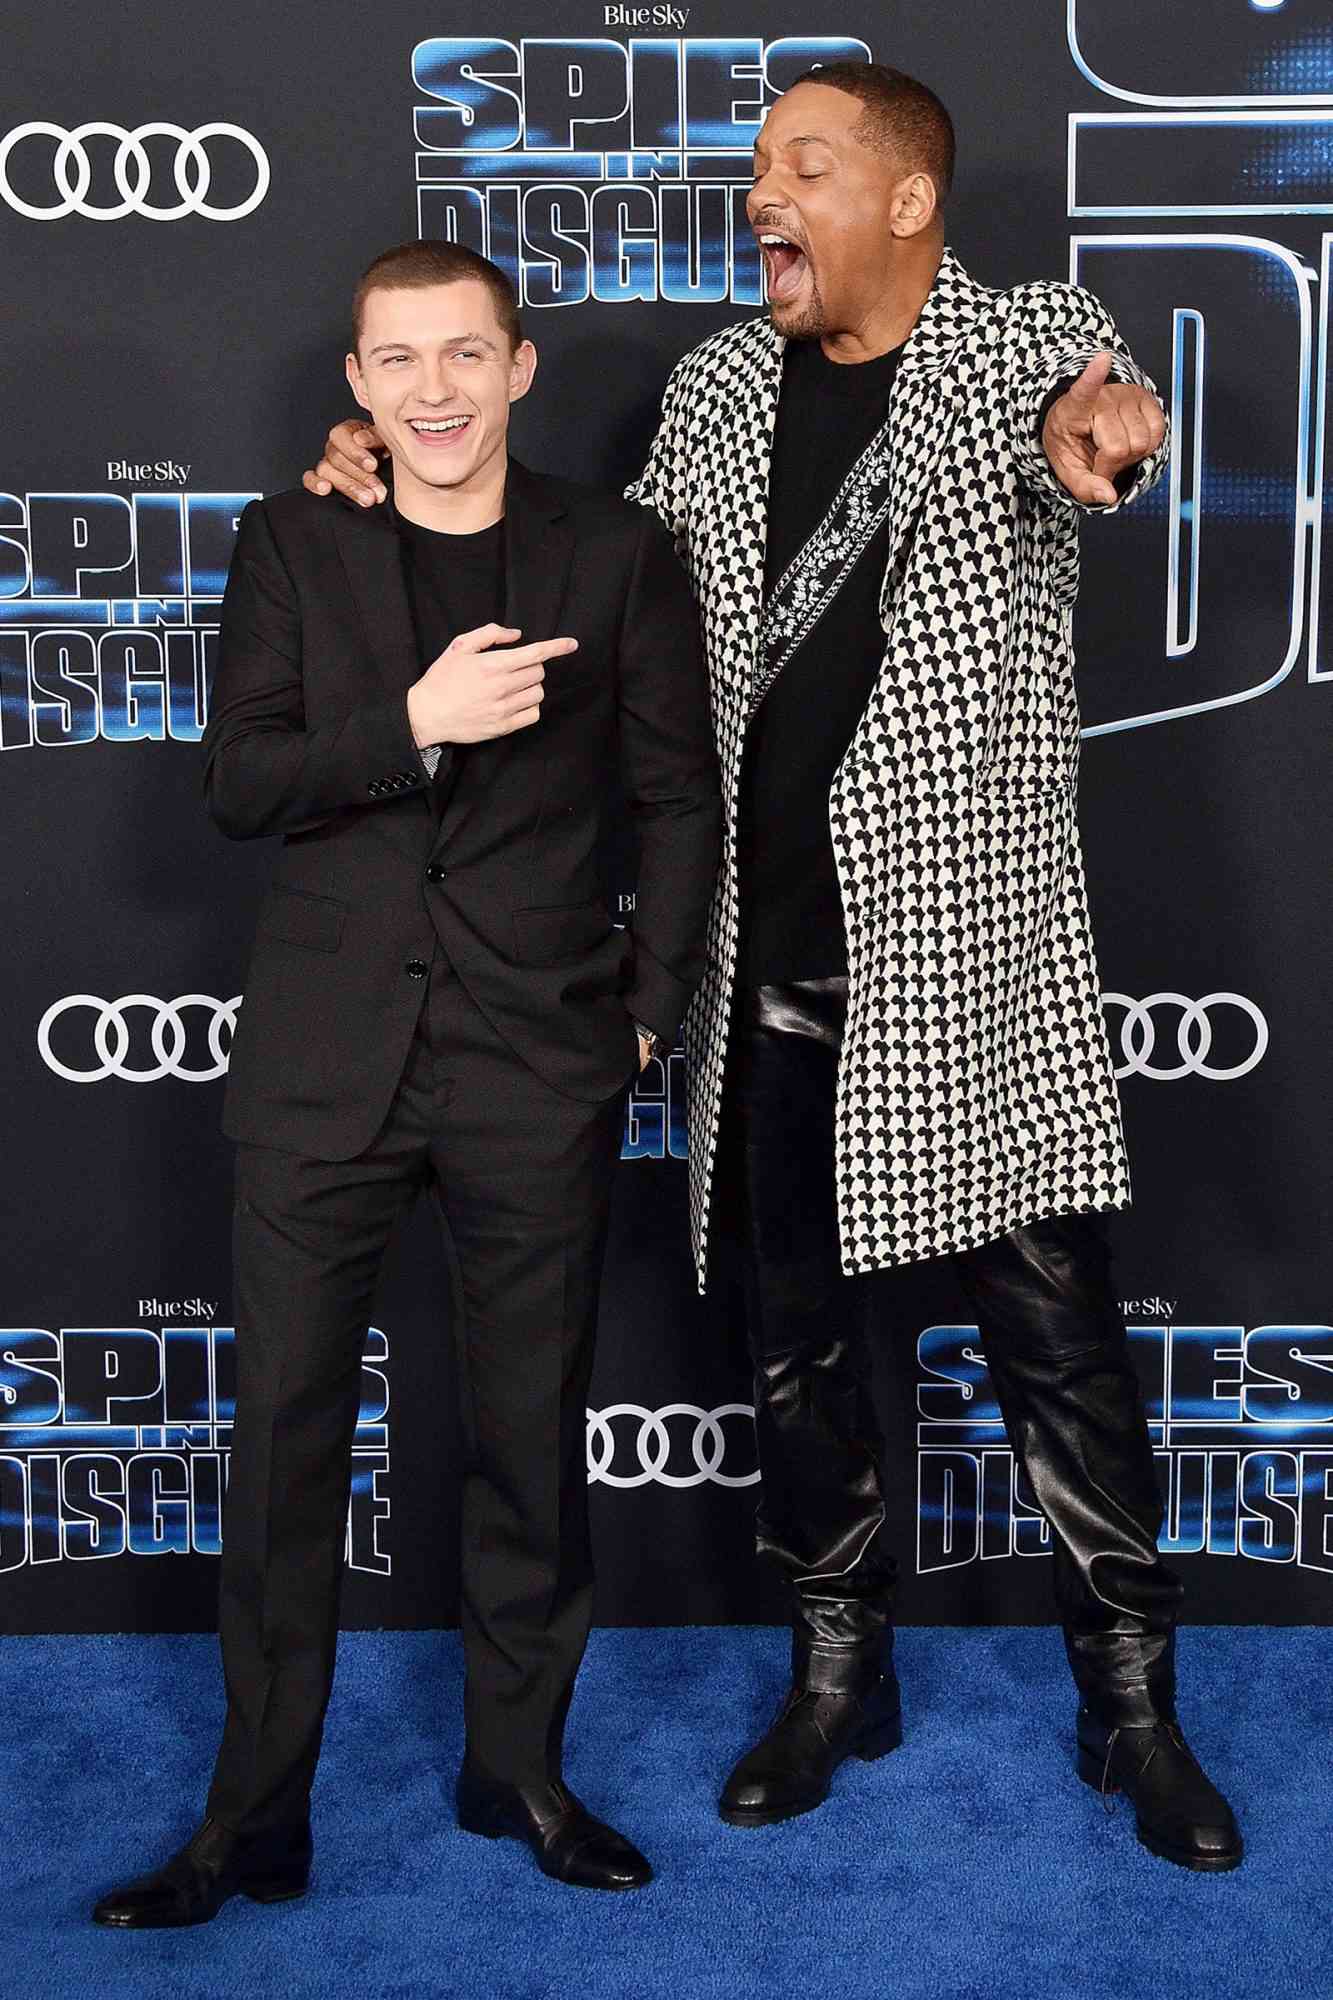 Will Smith and Tom Holland arrive at the premiere of 20th Century Fox's "Spies In Disguise" at El Capitan Theatre on December 4, 2019 in Los Angeles, California